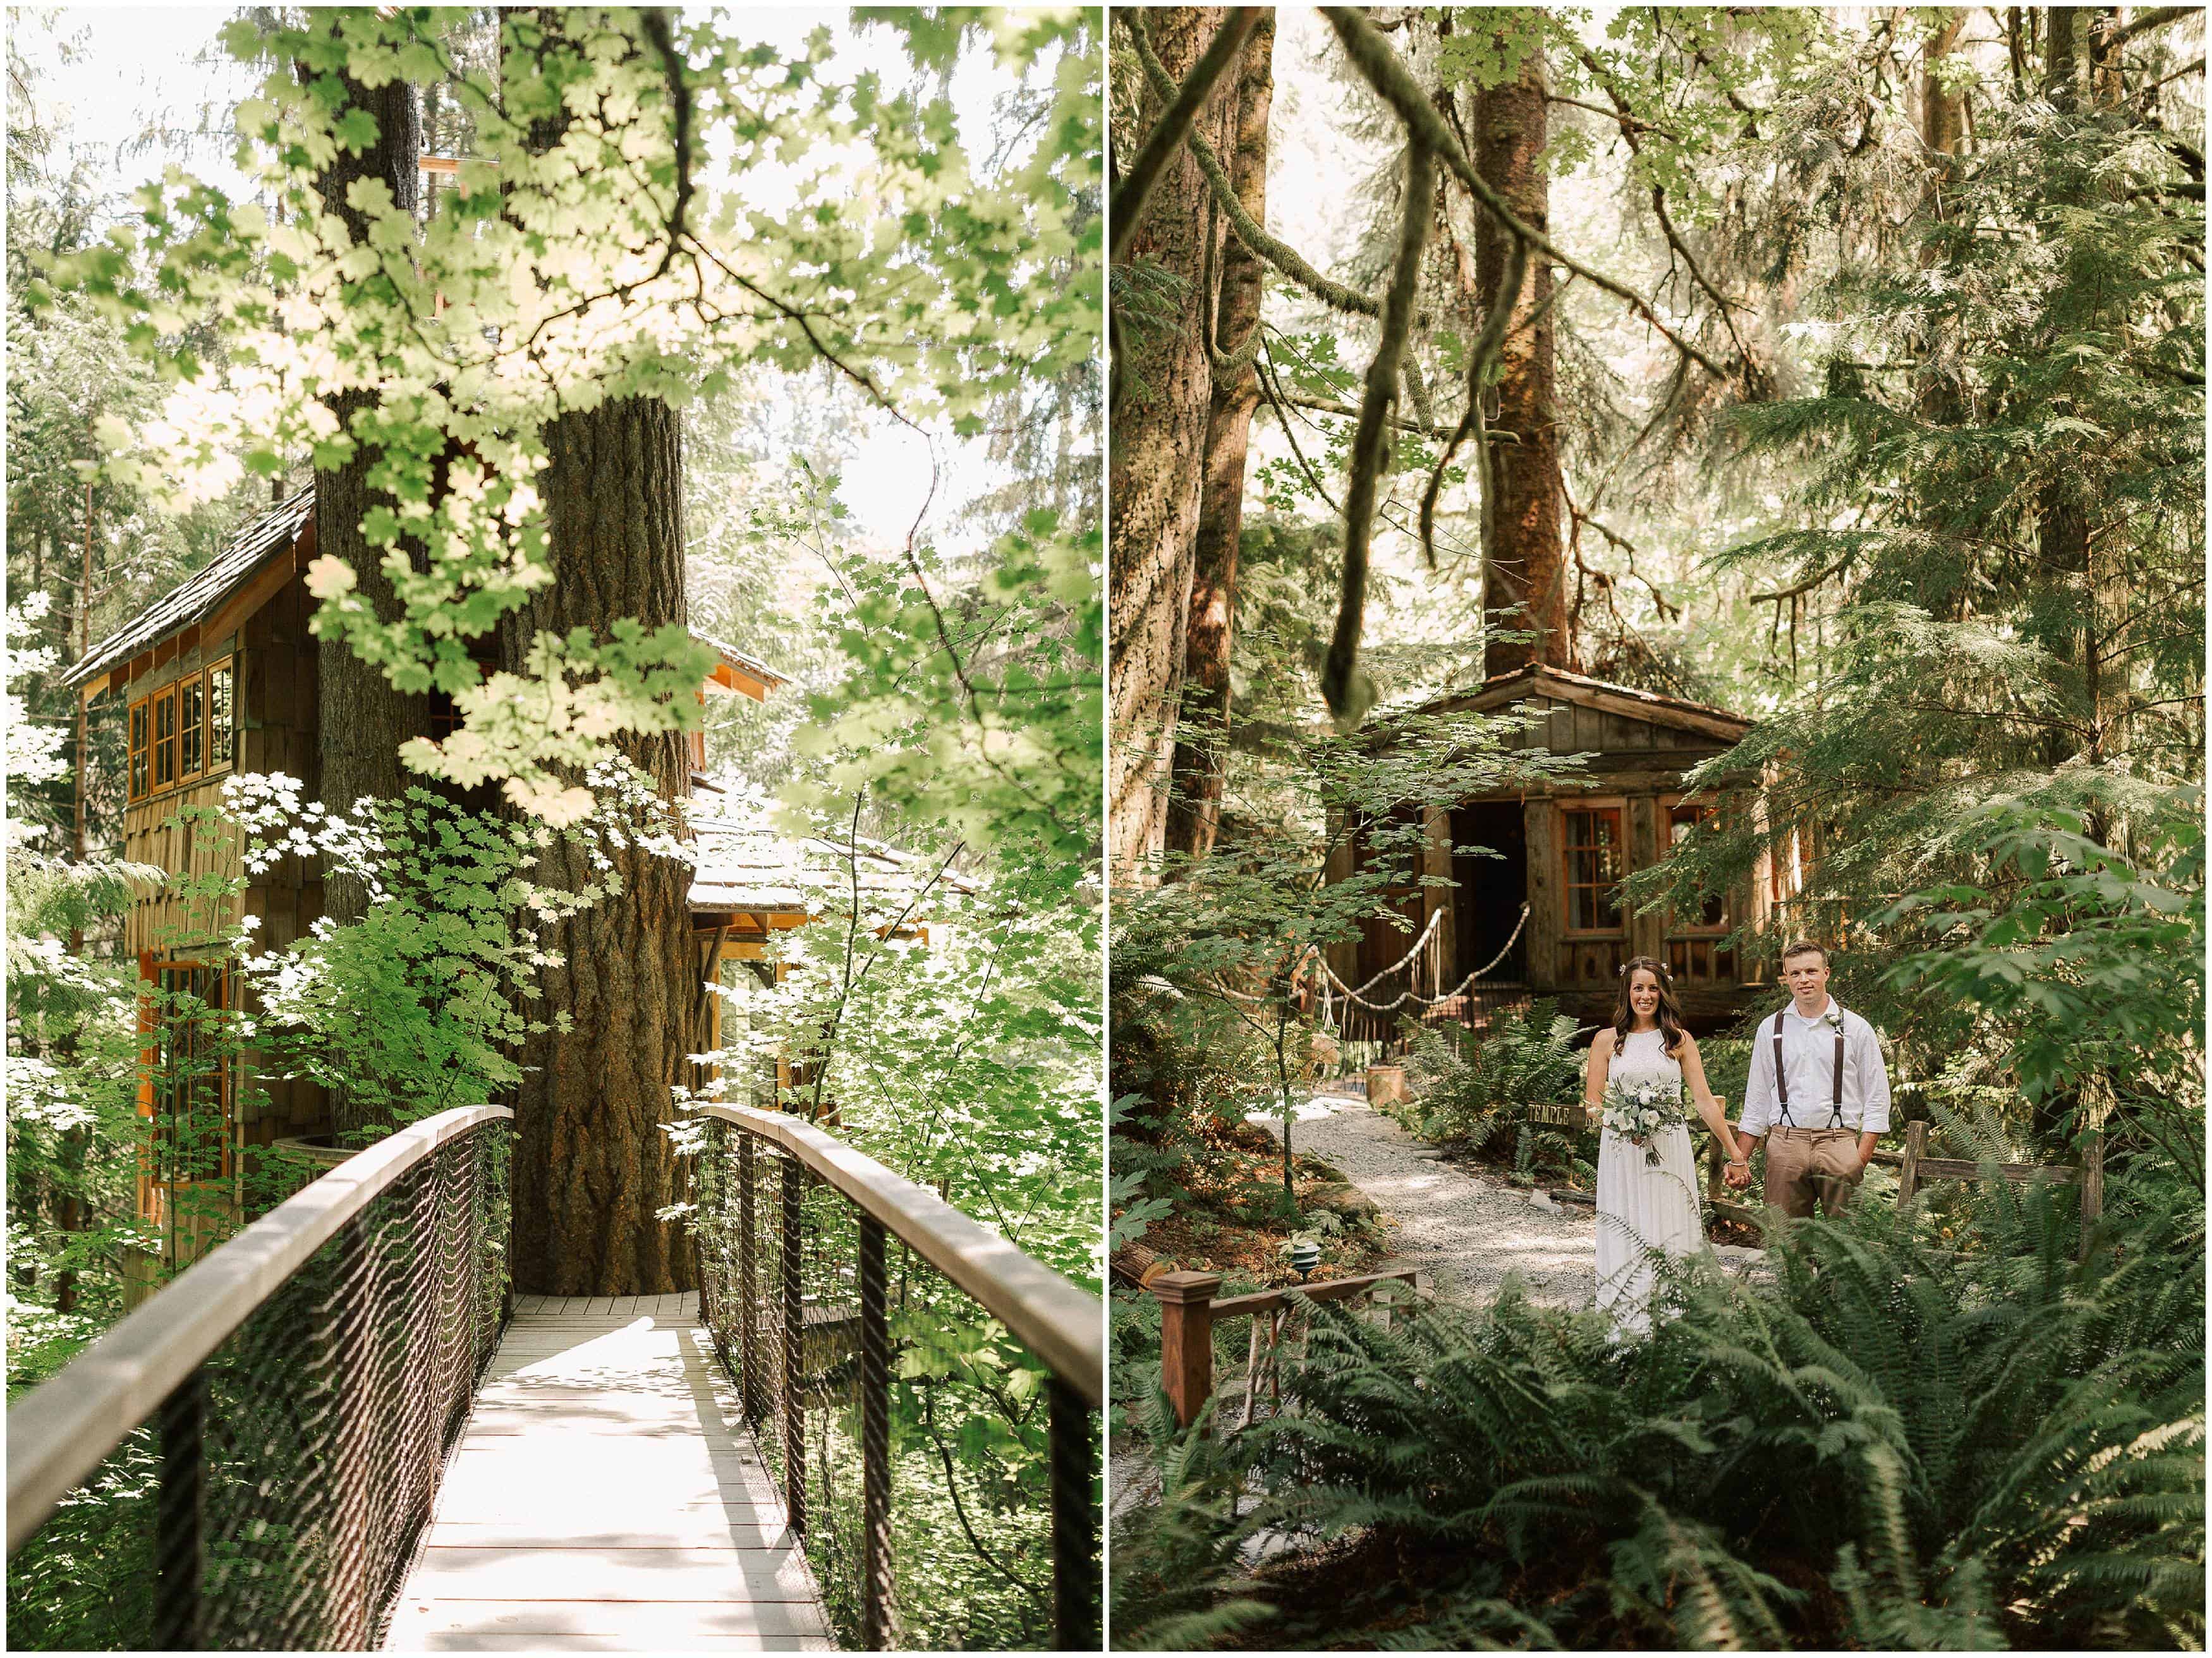 Amongst the best places to elope in Washington State, Treehouse Point by Luma Weddings